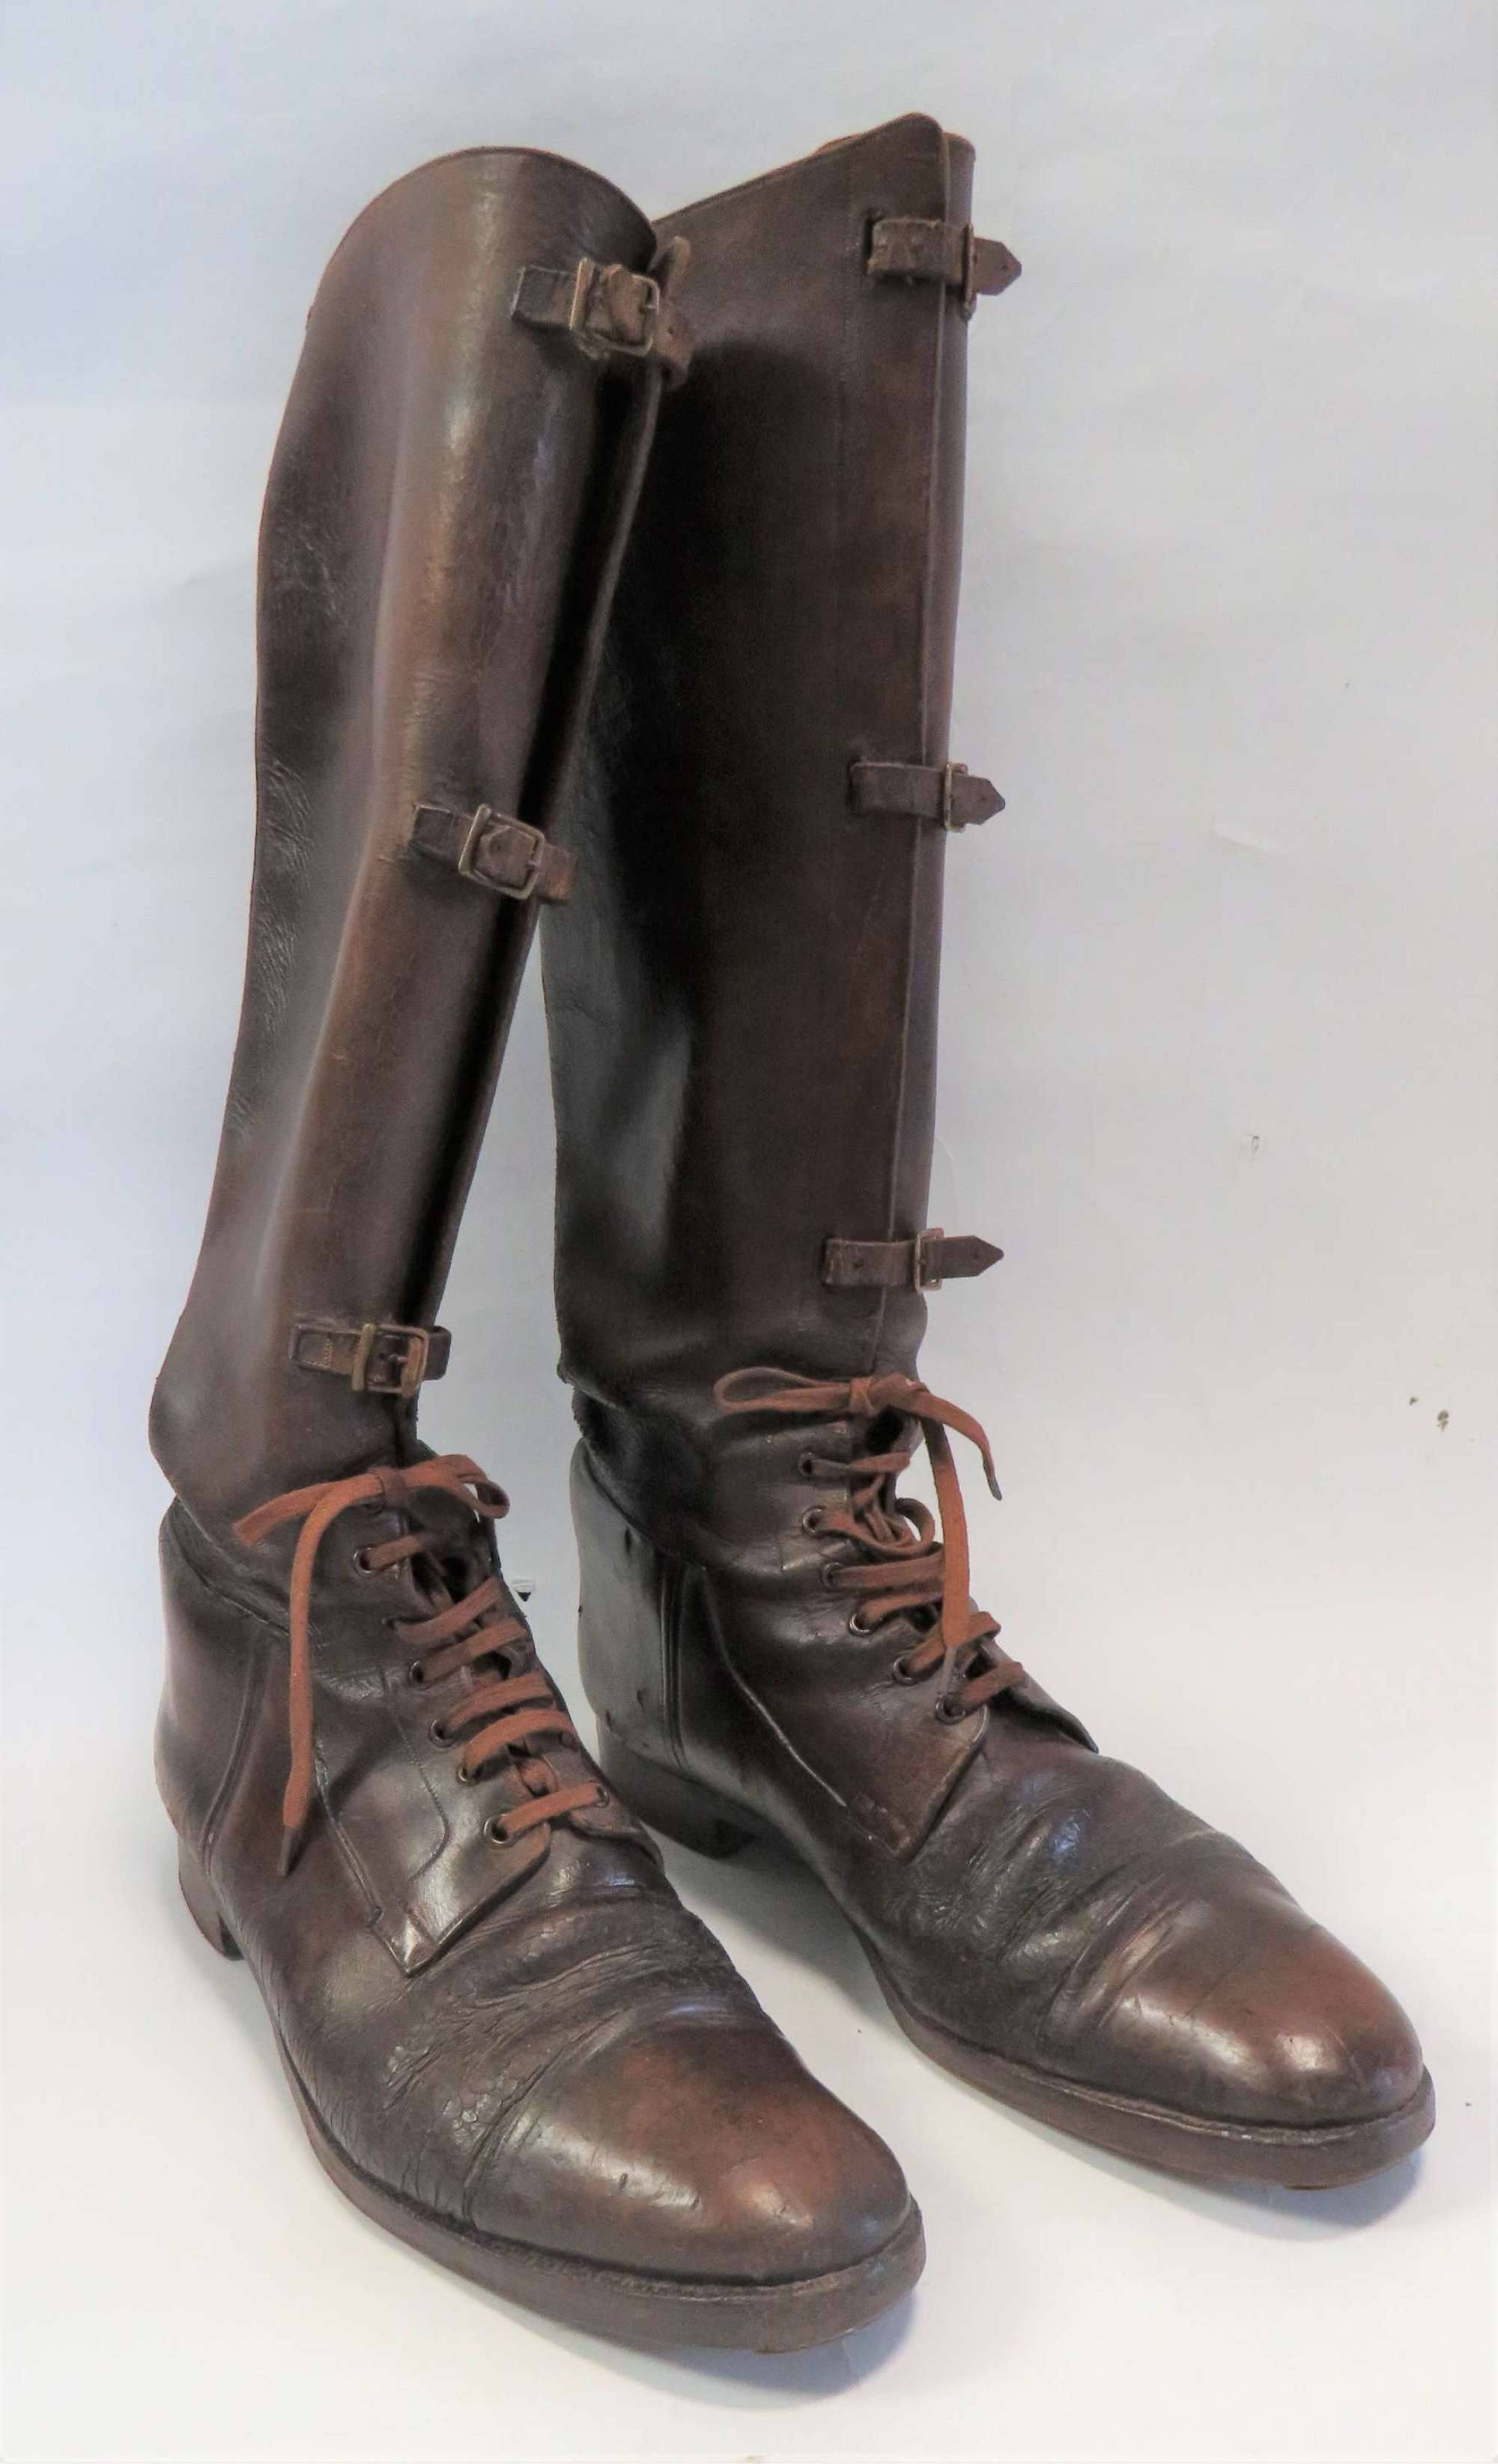 Scarce pair of WW1 Officers Trench / Riding Boots